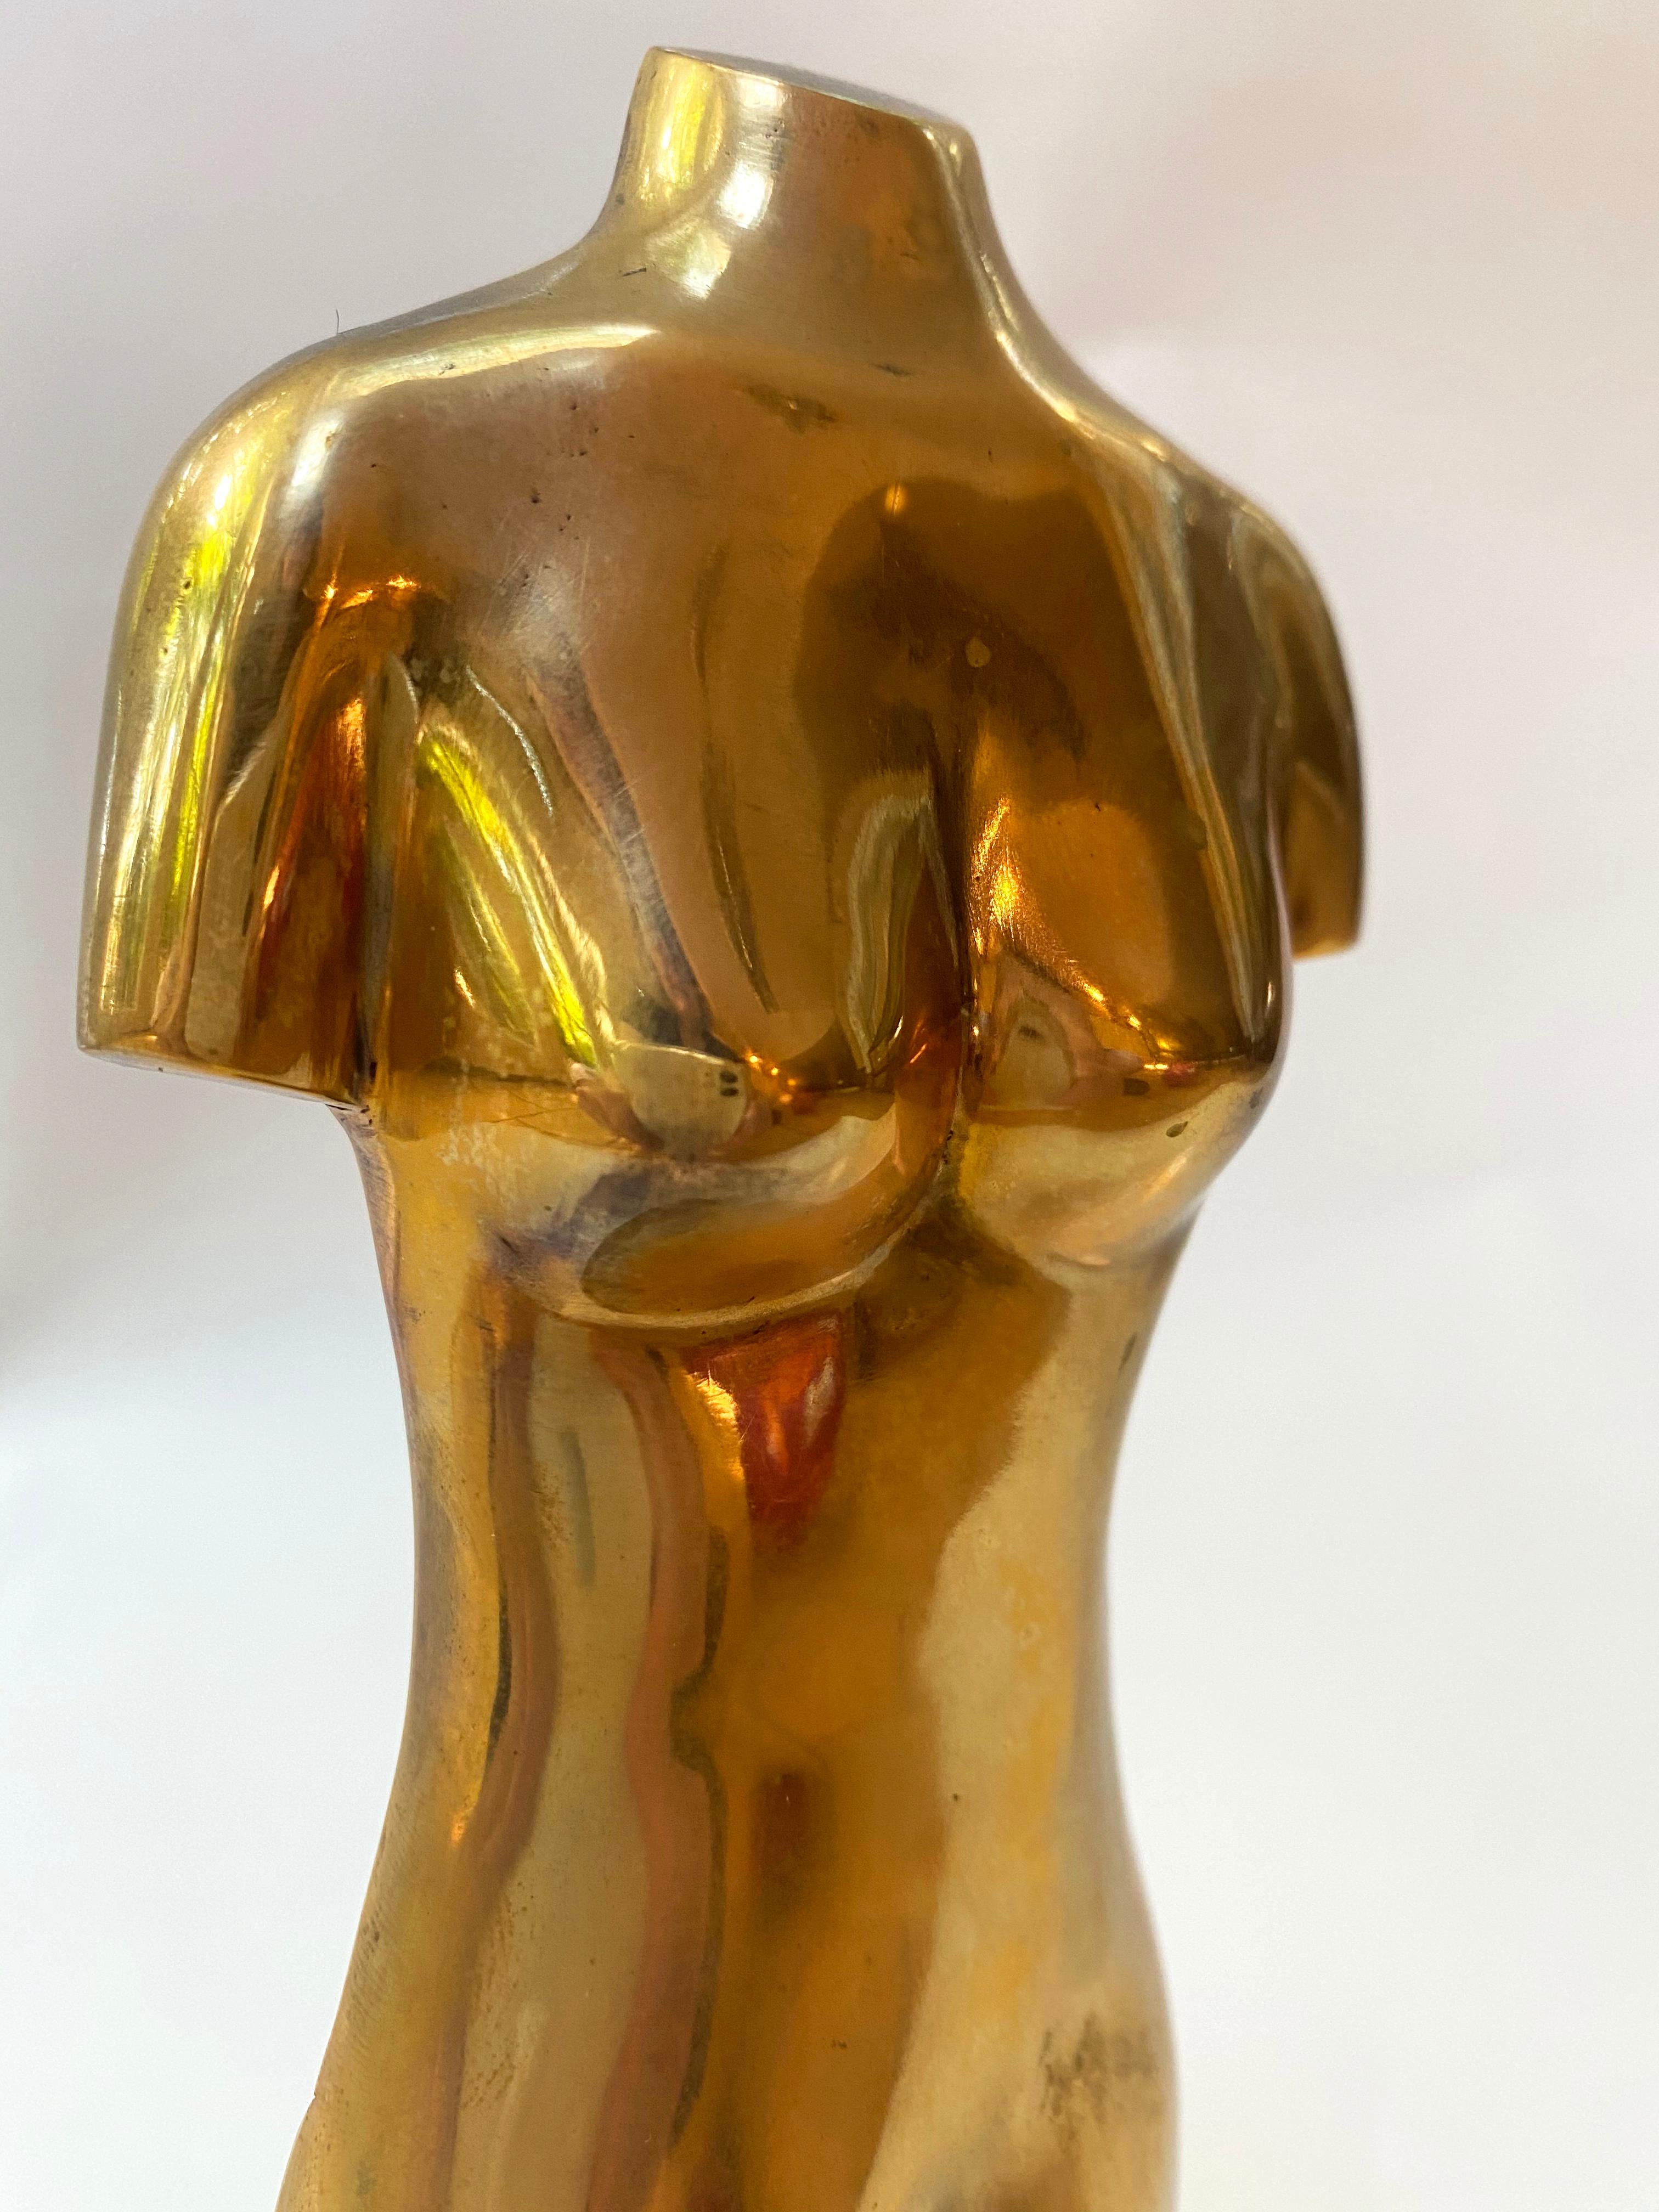 A striking and fun brass figural sculpture by Dr. Henry 